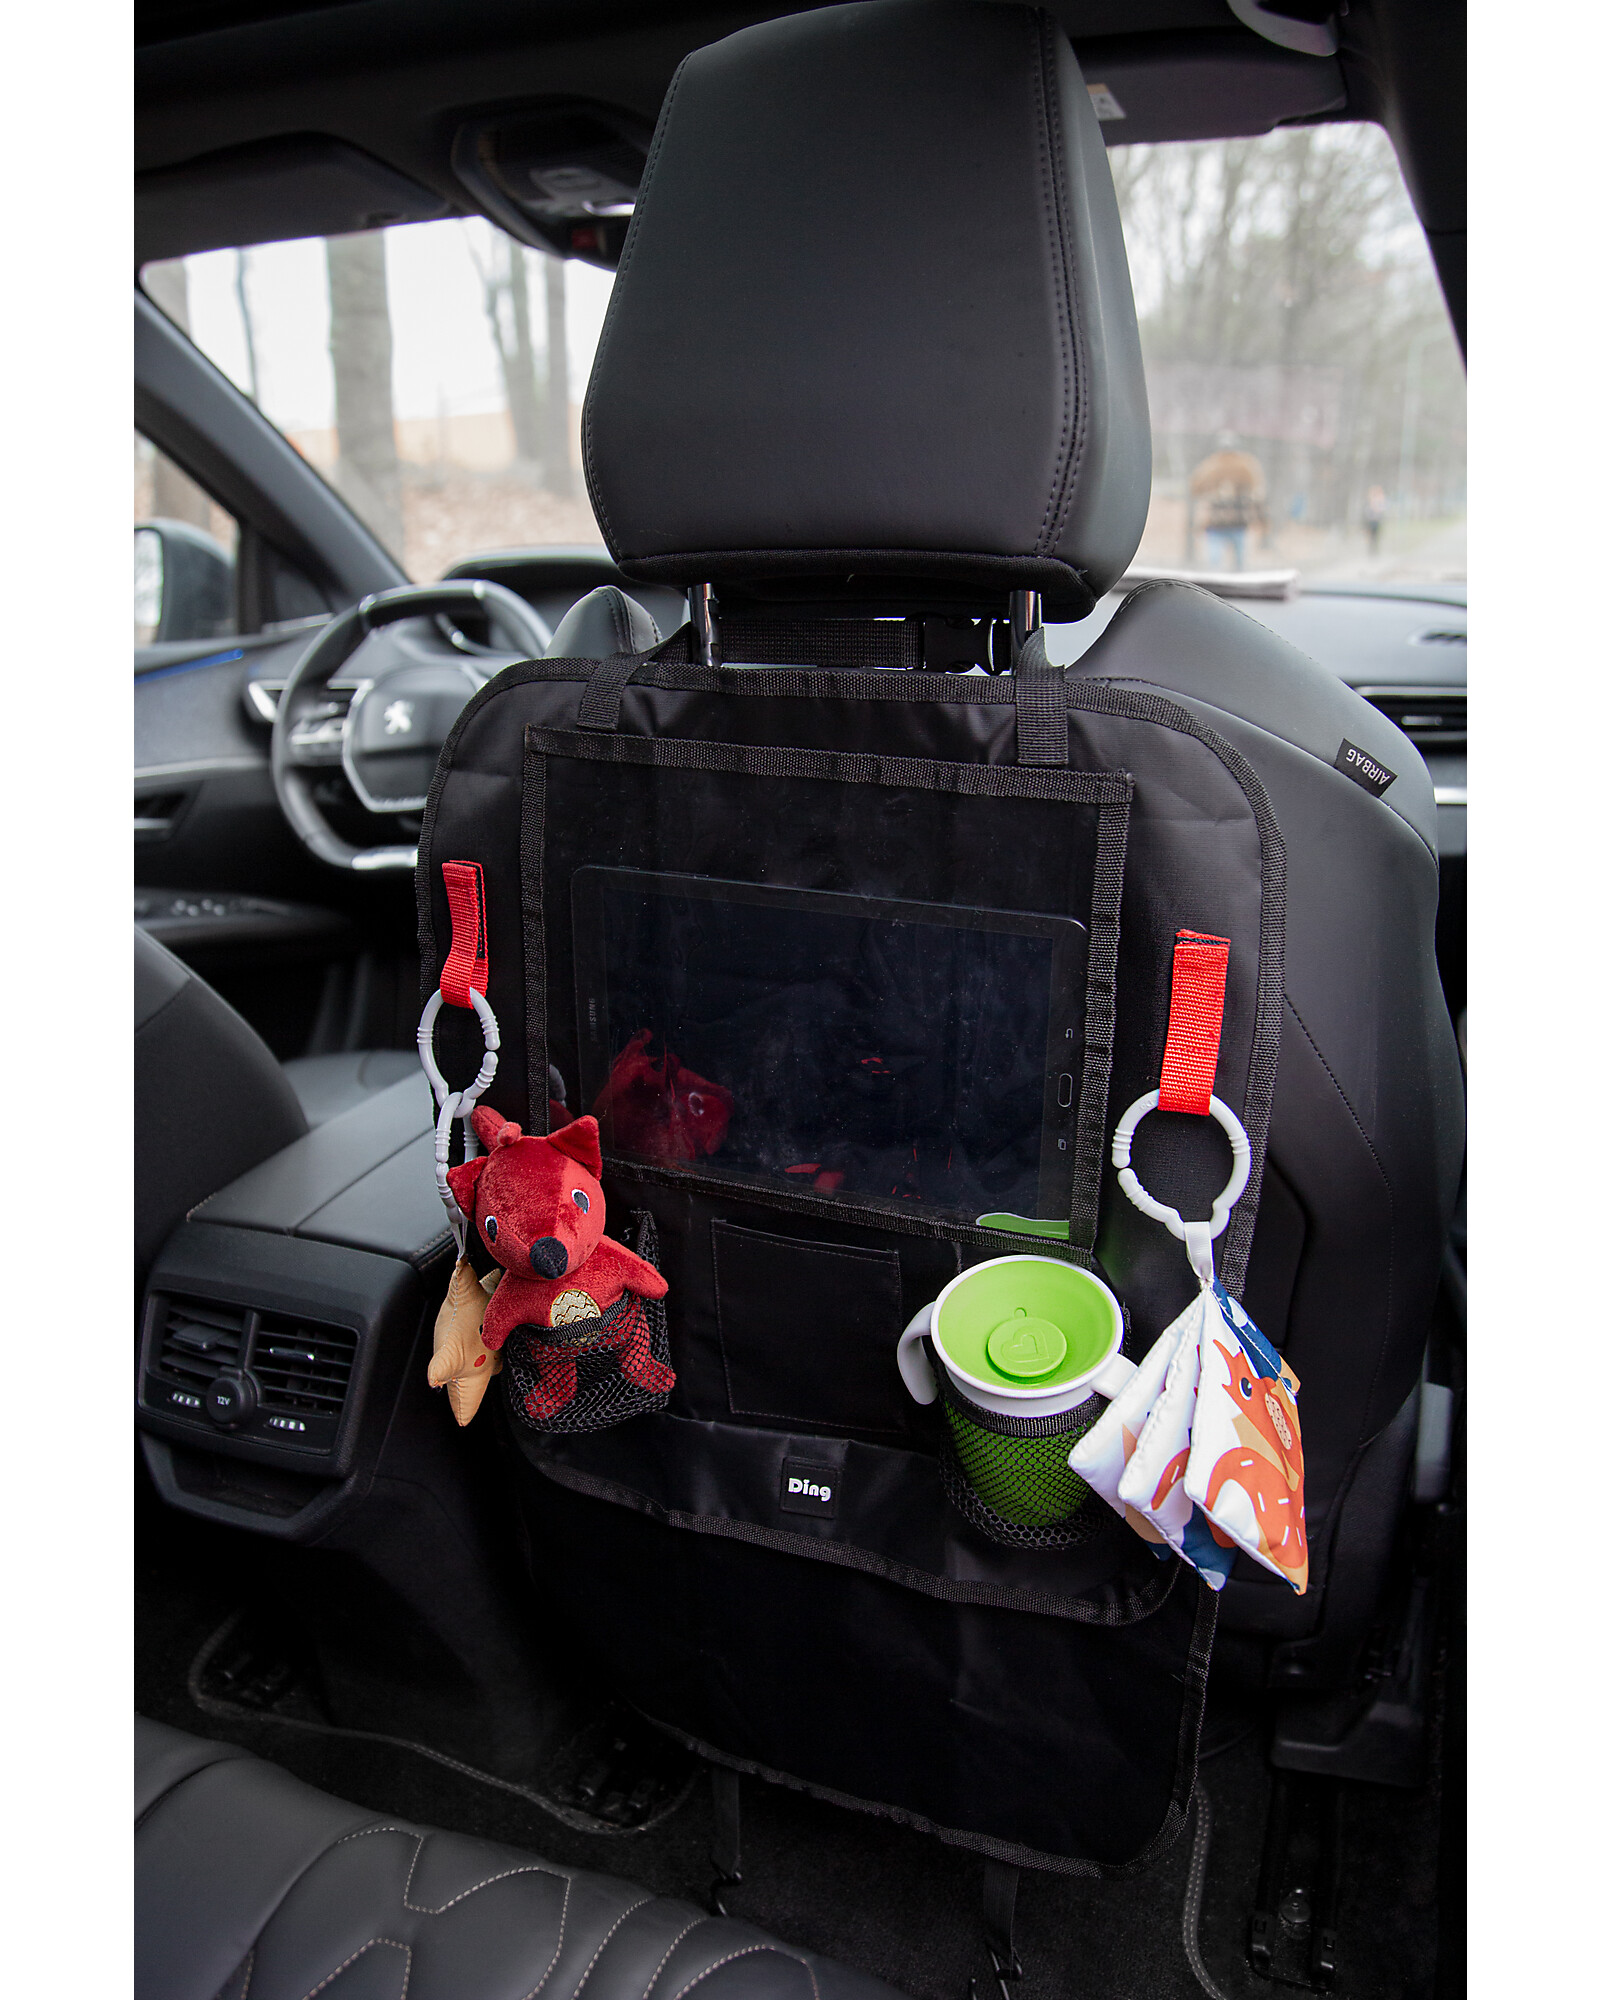 https://data.family-nation.com/imgprodotto/ding-baby-car-seat-organizer-black-with-tablet-holder-car-seat-accessories_510208_zoom.jpg